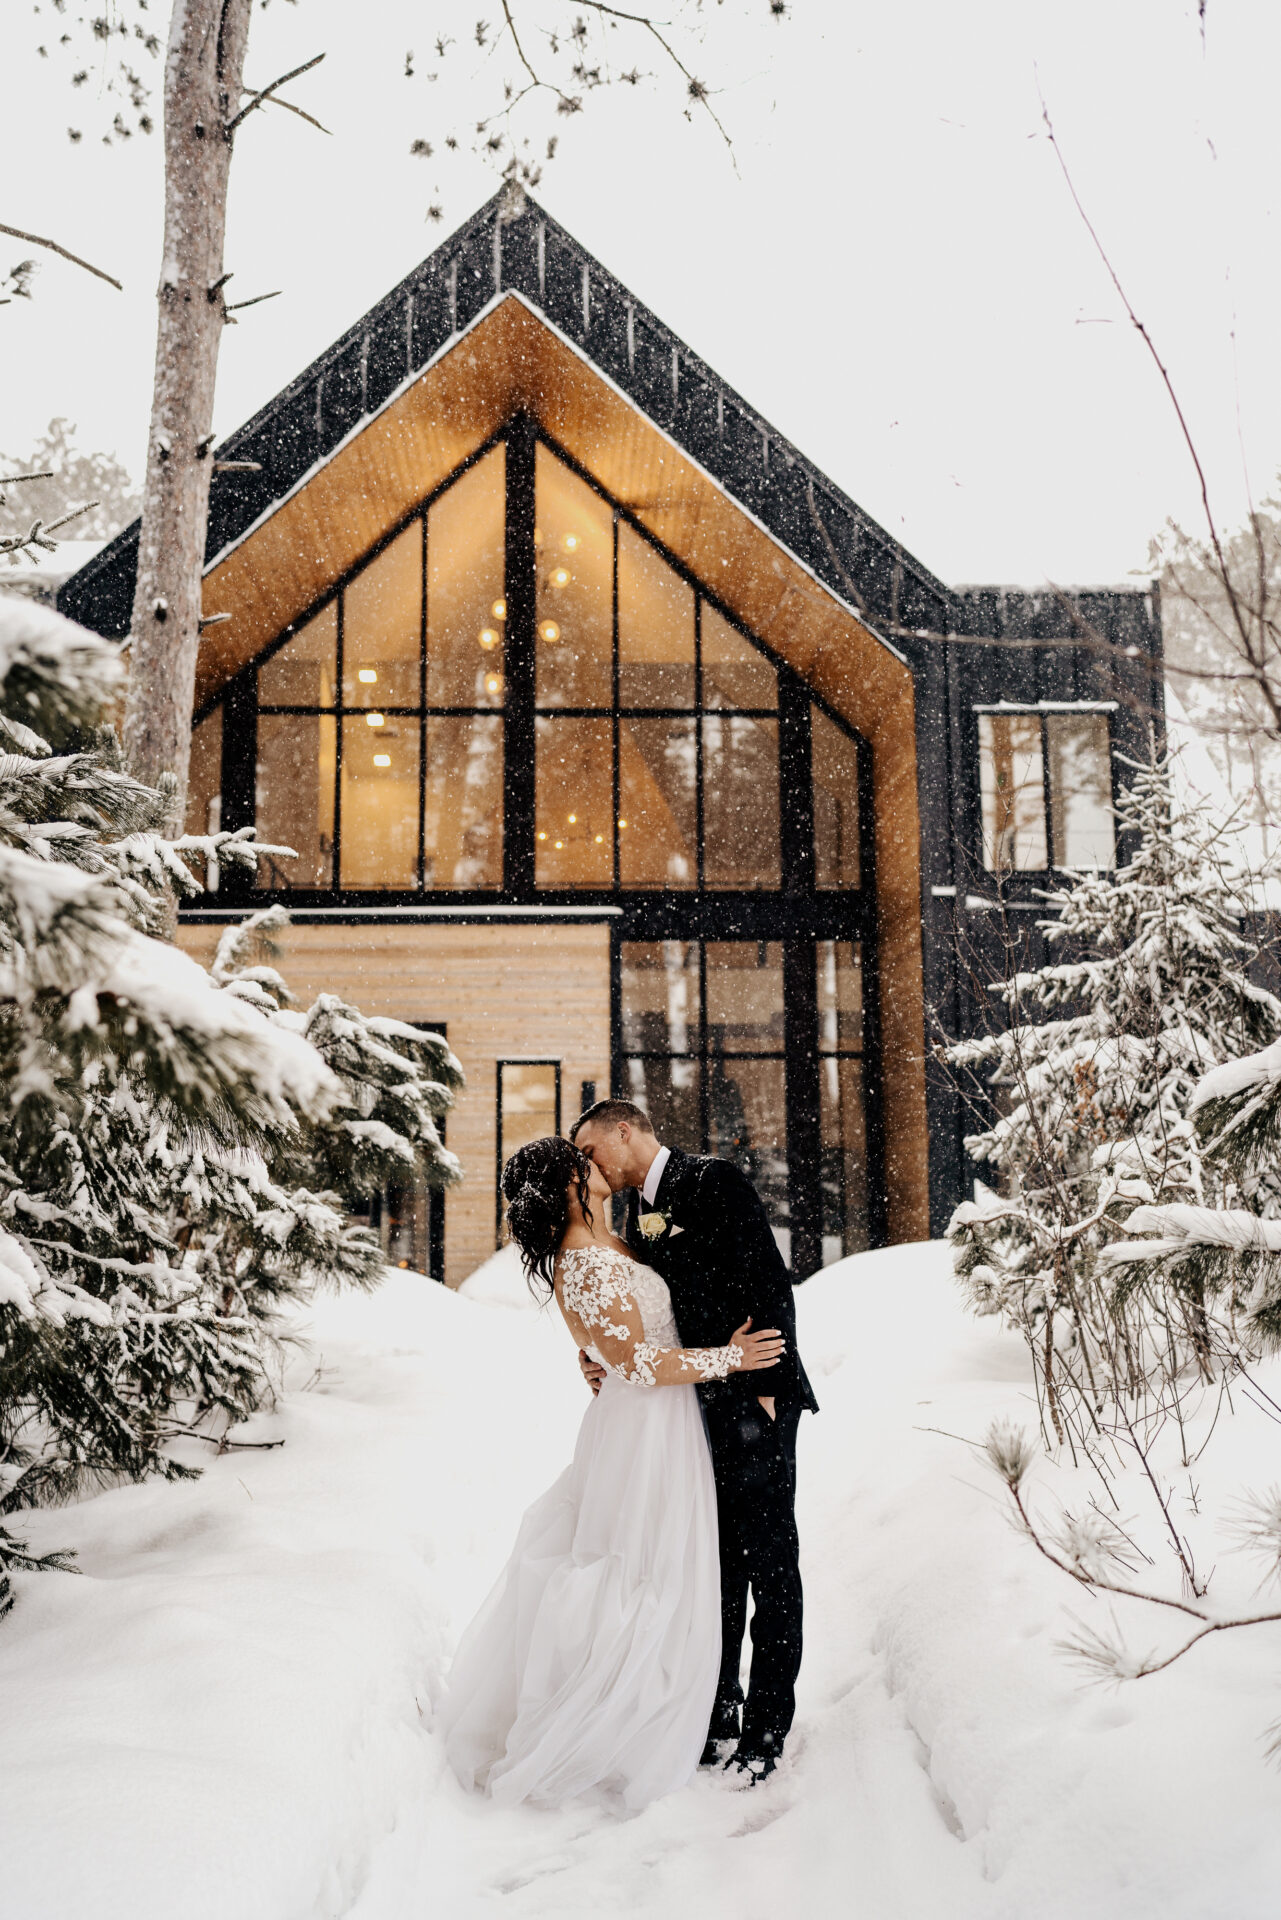 Bride and Groom taking snowy couple portraits in front of Pinewood Weddings & Events Venue in Minnesota during the winter